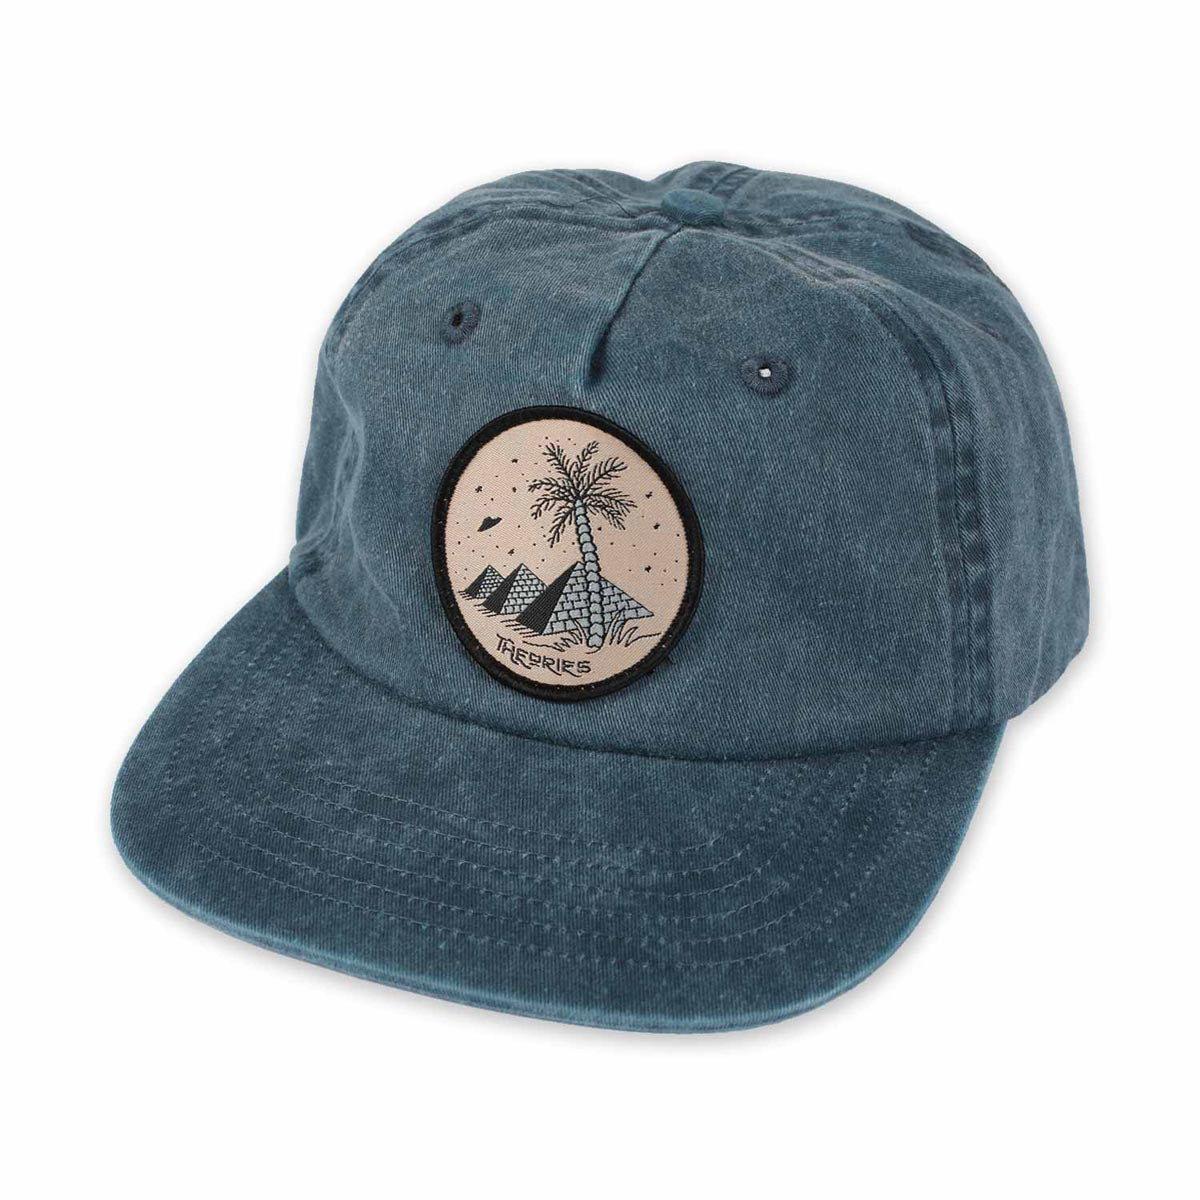 Theories Oasis Hat - Washed Blue image 1